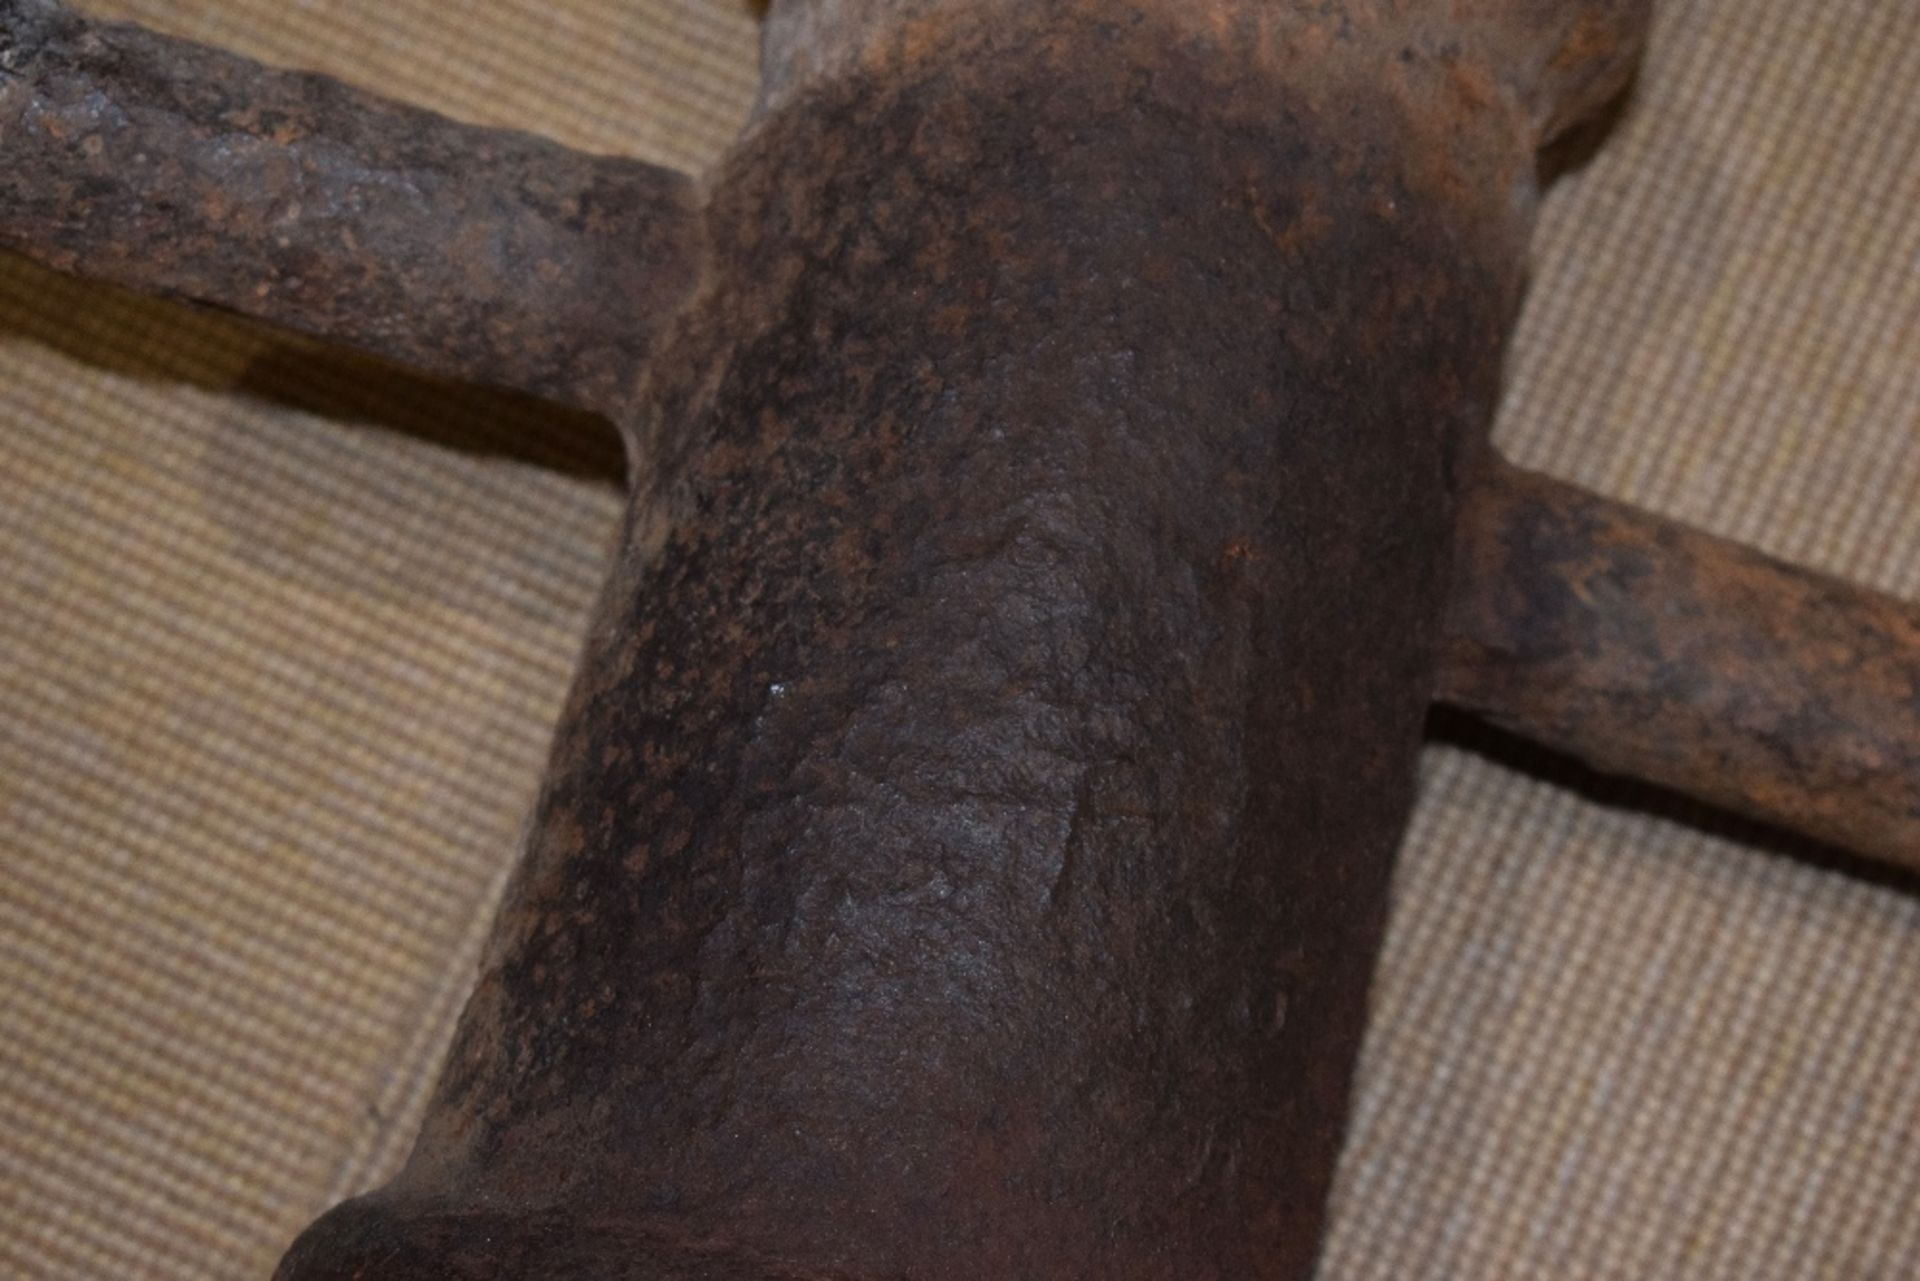 Heavy Chinese Cast Iron Cannon - Image 6 of 6